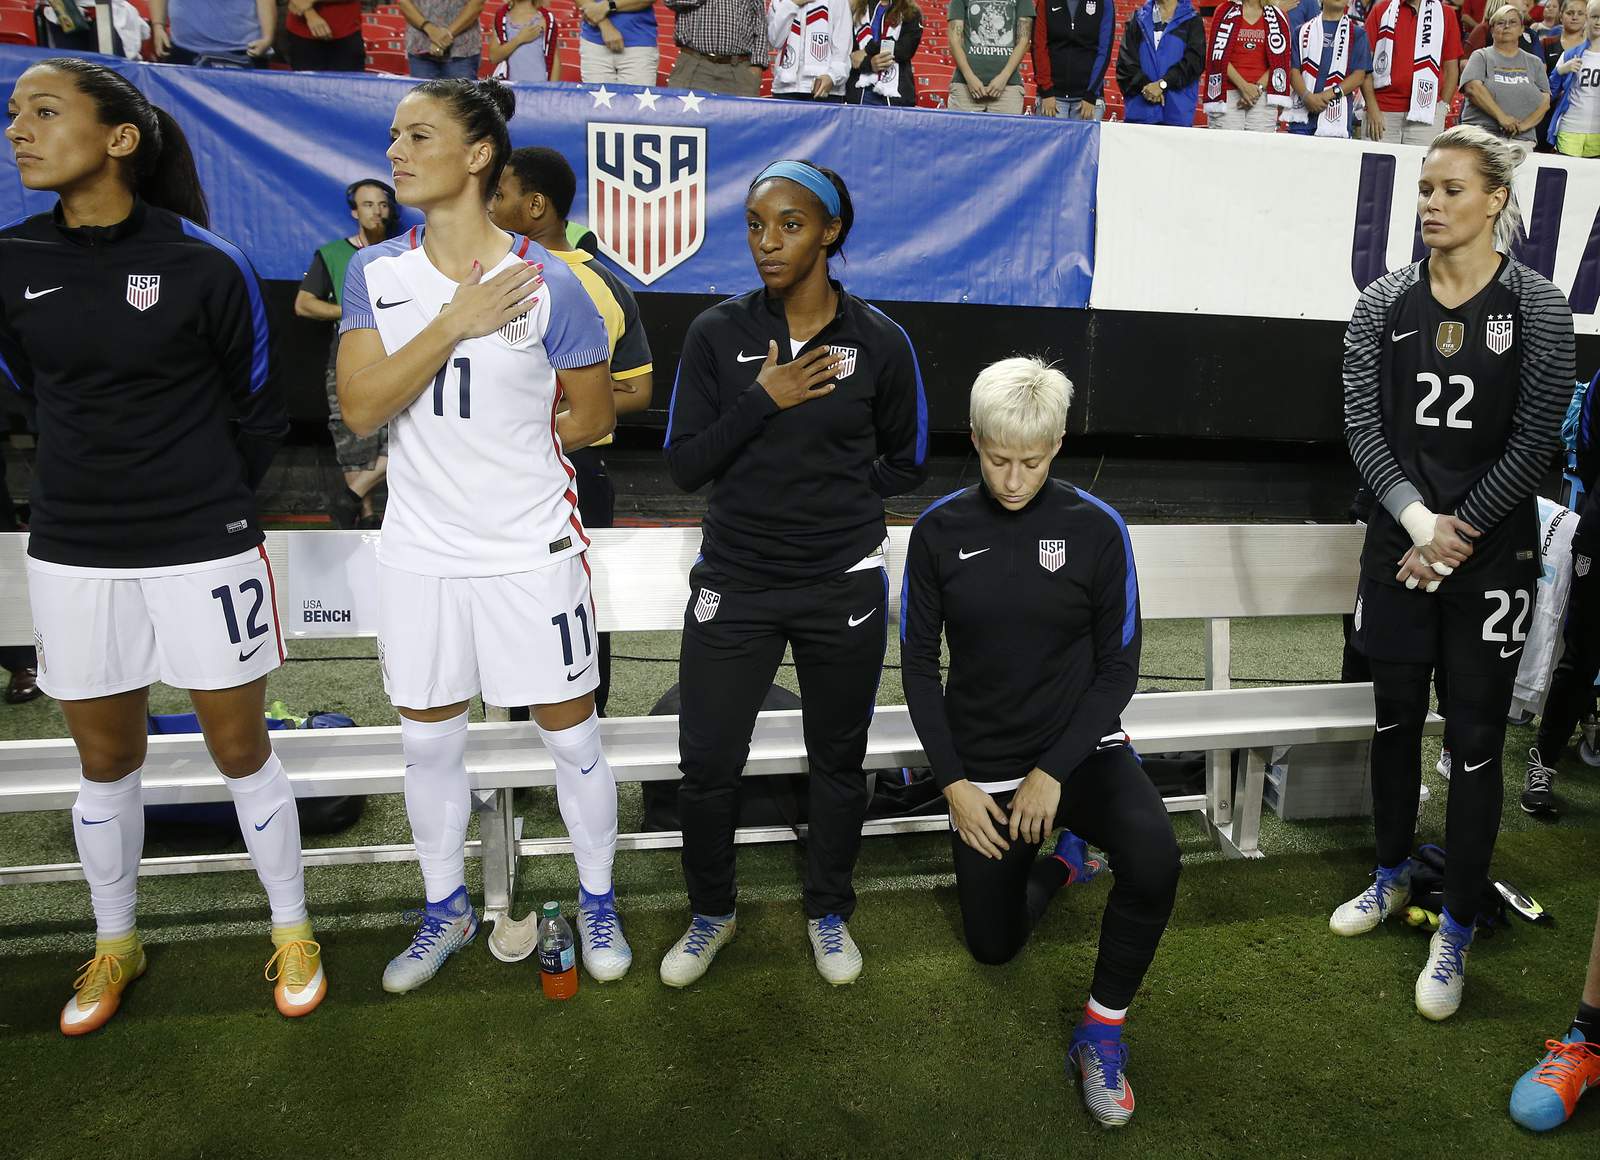 U.S. Soccer president addresses repeal of anthem policy